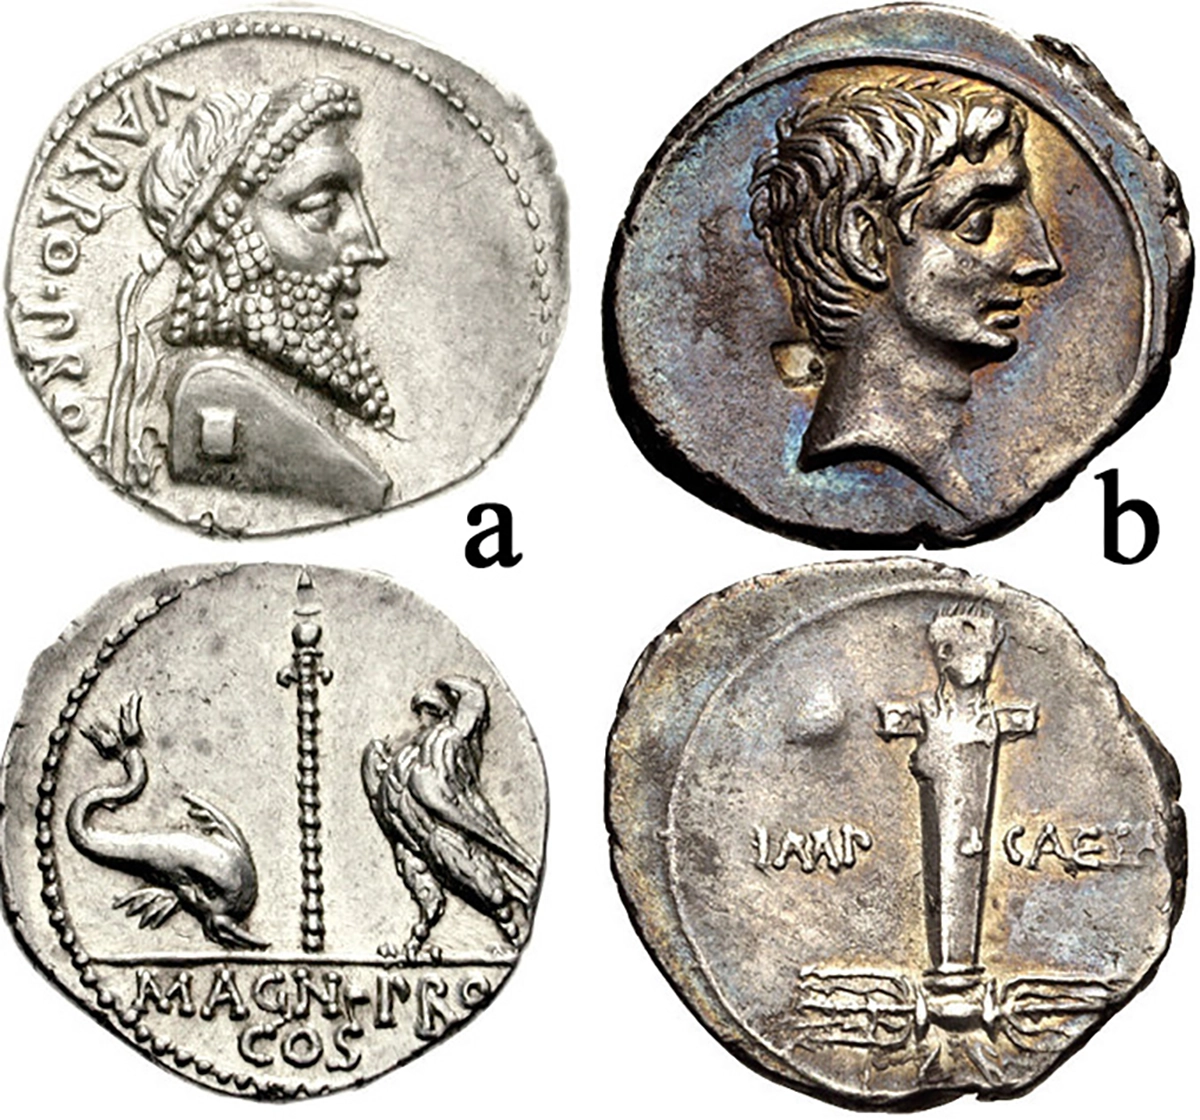 Figure 5: Terminus. a) Pompey the Great. 49 BCE. AR Denarius (18mm, 3.88 g.). Mint movingwith Pompey in Greece. Terentius Varro, proquaestor. Diademed herm of Jupiter Terminus right / MAGN • PRO/COS in two lines in exergue, Dolphin downward to right, scepter, and eagle standing left, all on ground line. Crawford 447/1a. b) Octavian. 30-29 BCE. AR Denarius (19mm, 3.08 g.). Italian (Rome?) mint. Bare head right / Ithyphallic boundary stone surmounted by the laureate head of Octavian facing, winged thunderbolt below, RIC I 269a.